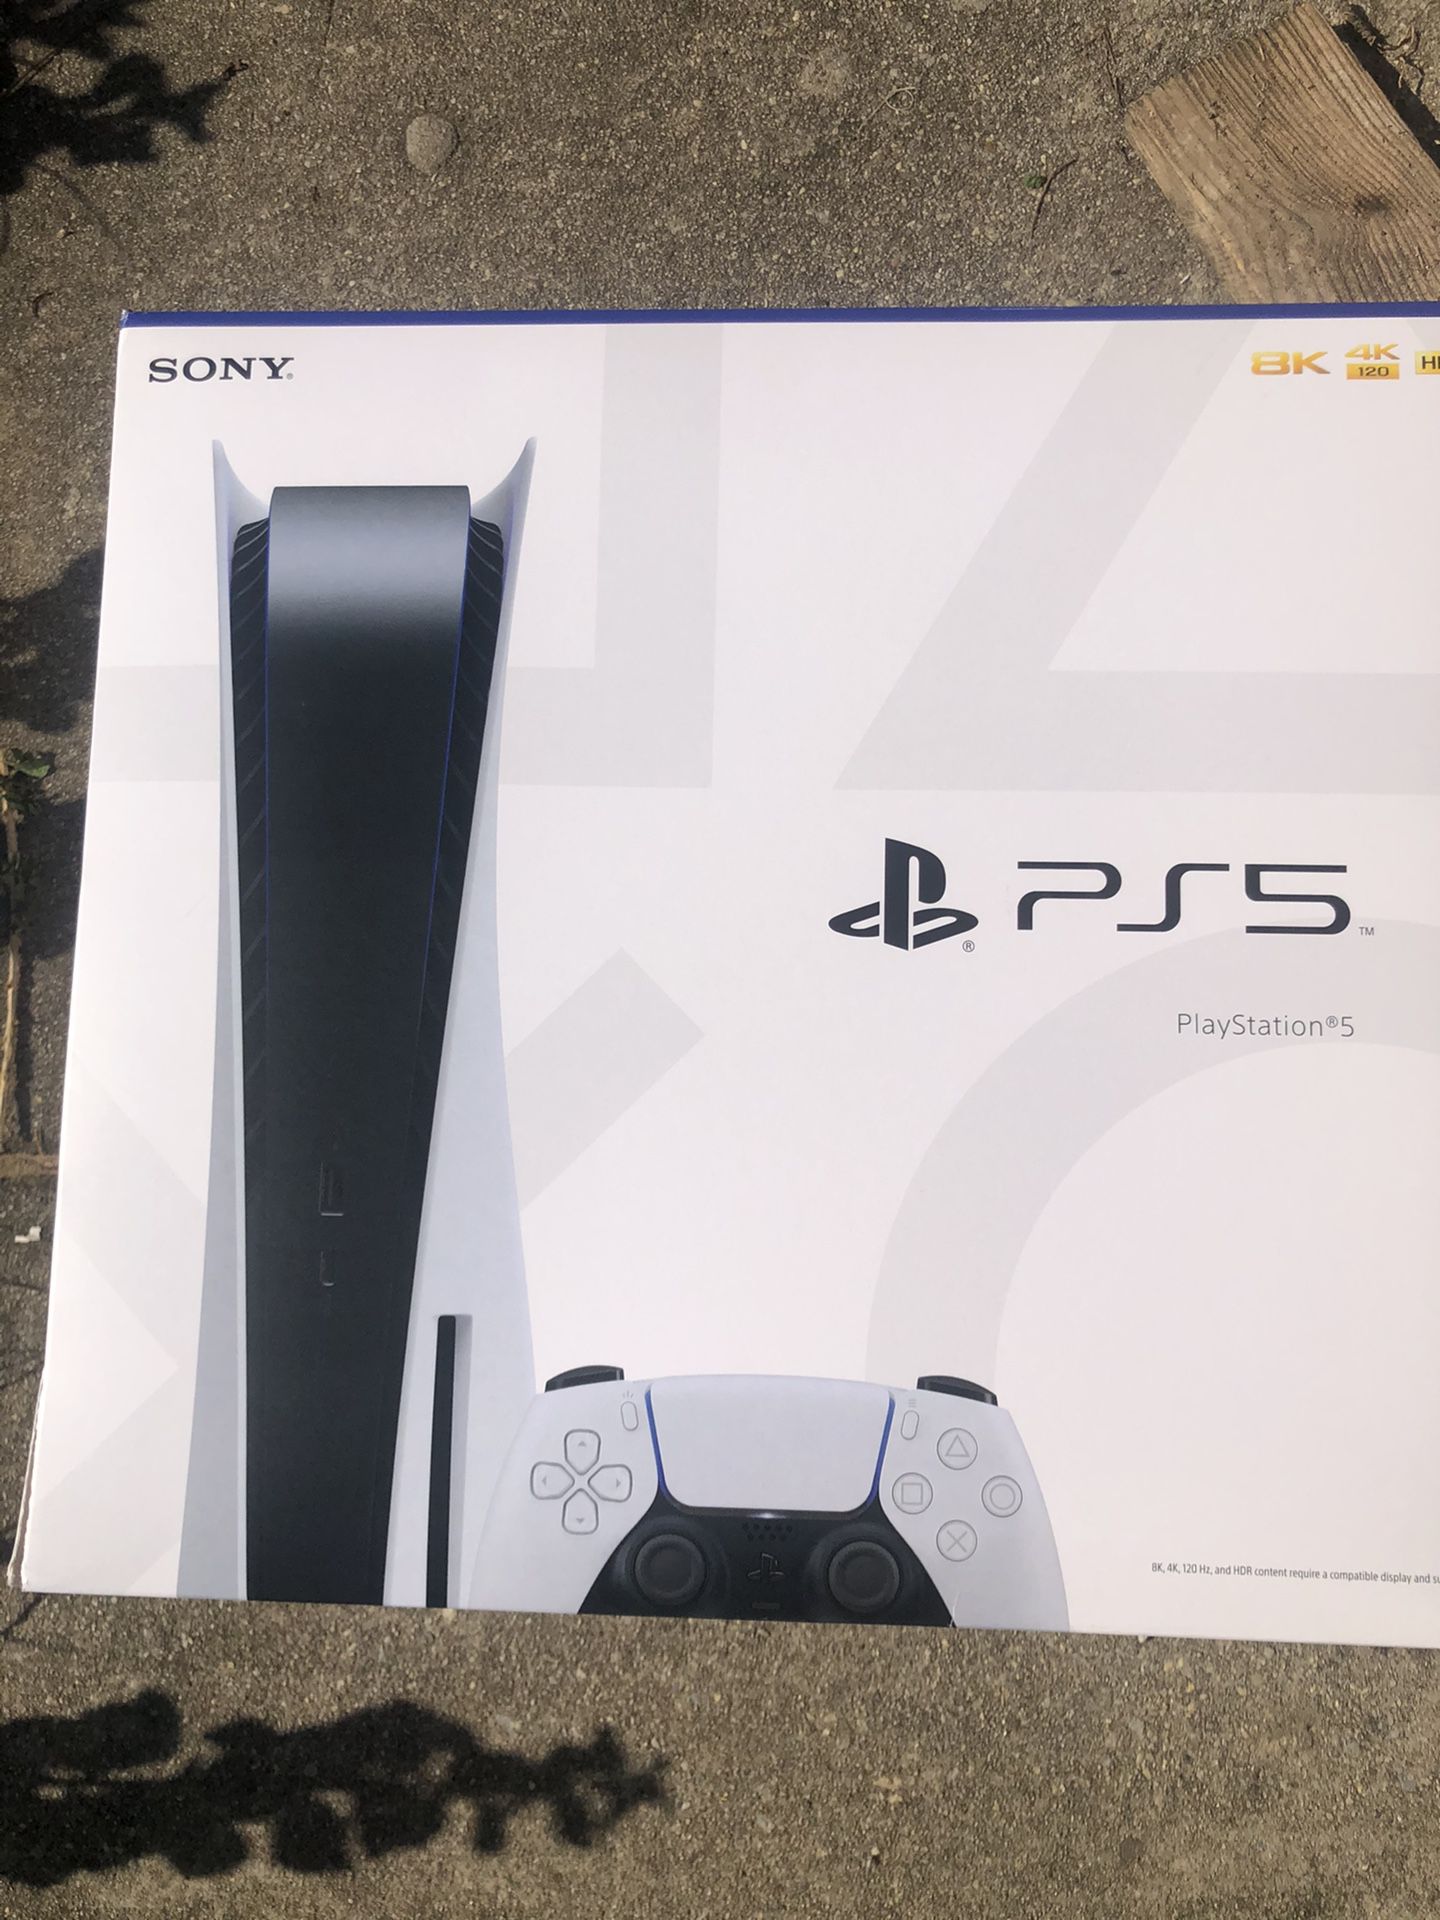 Brand new PlayStation 5 ps5 standard edition   Brand new with receipt      Cash only   